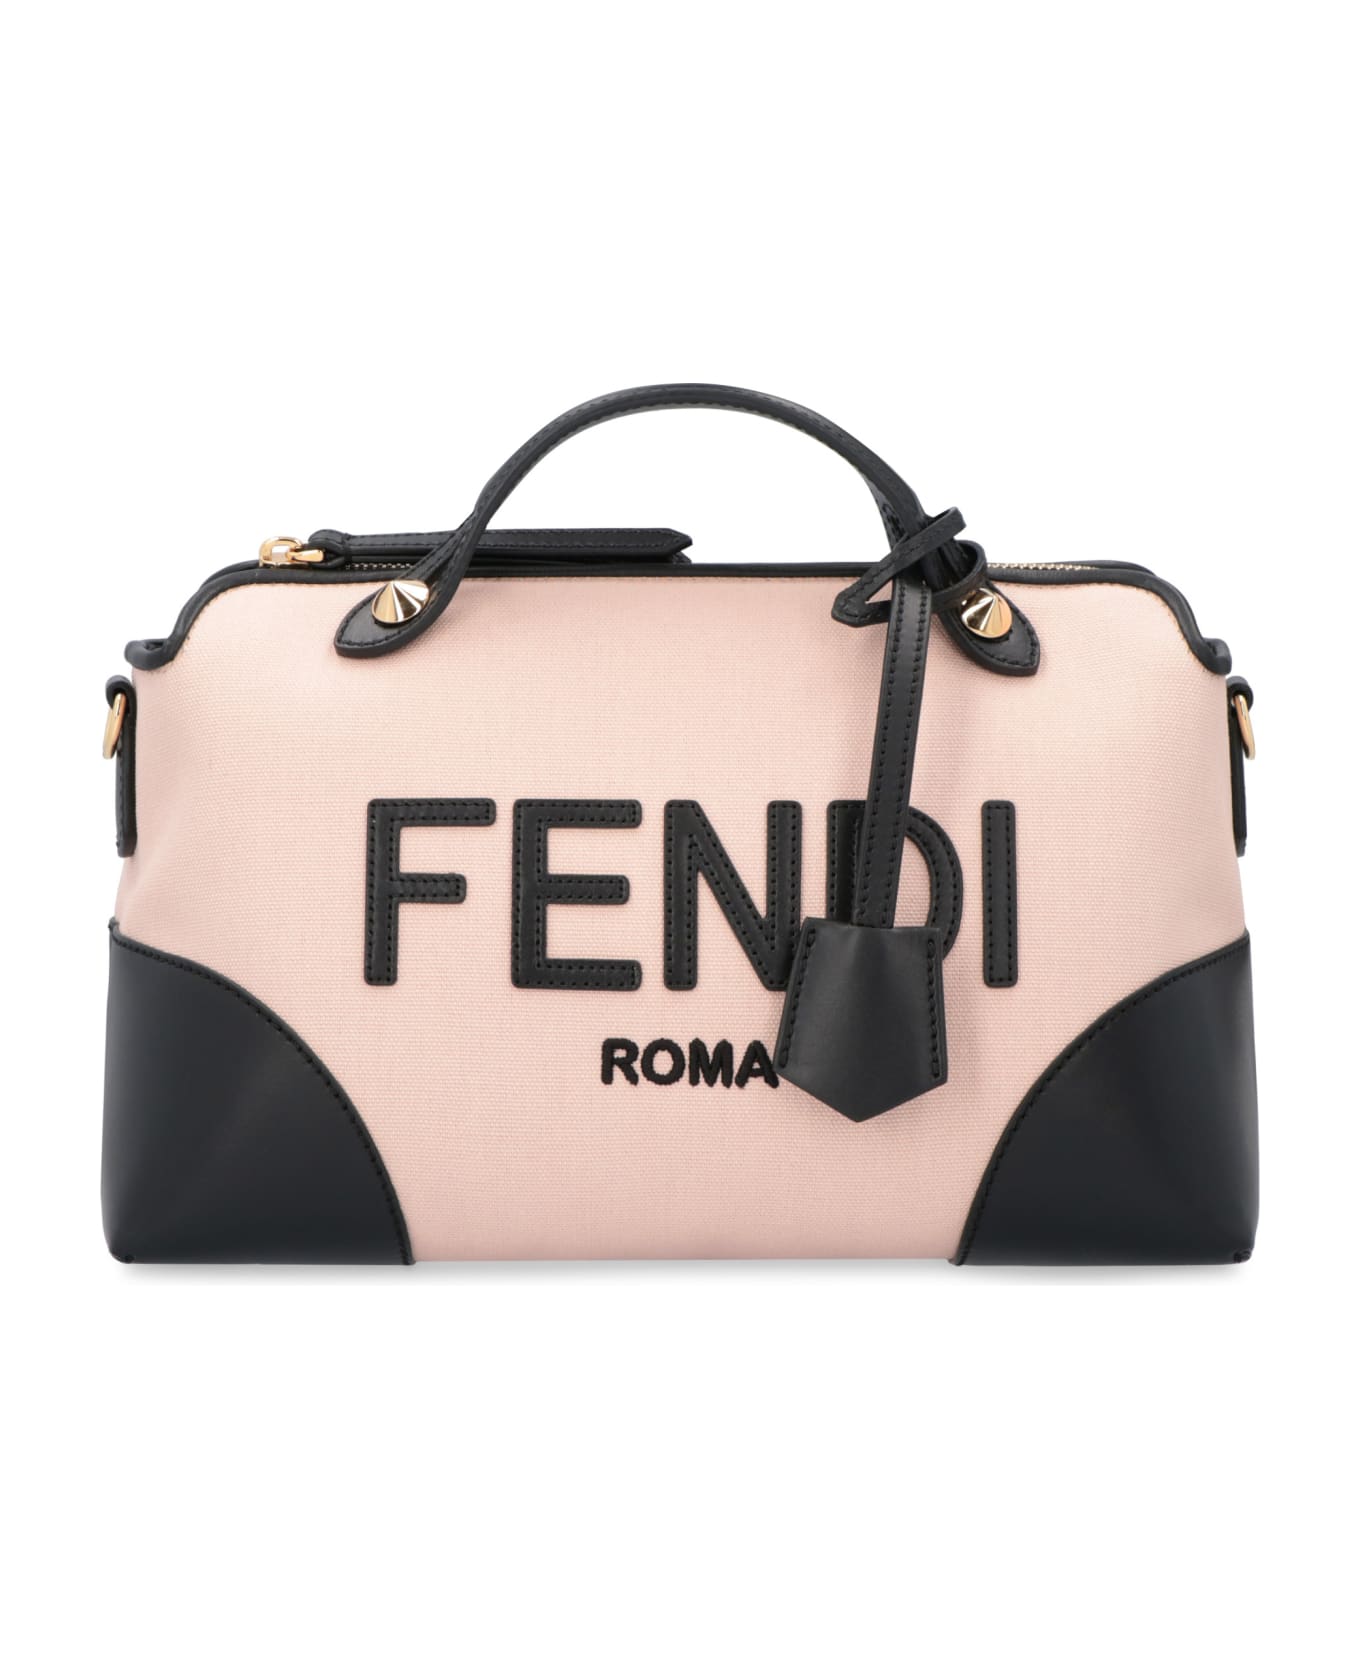 Fendi By The Way Canvas And Leather Handbag | italist, ALWAYS LIKE A SALE